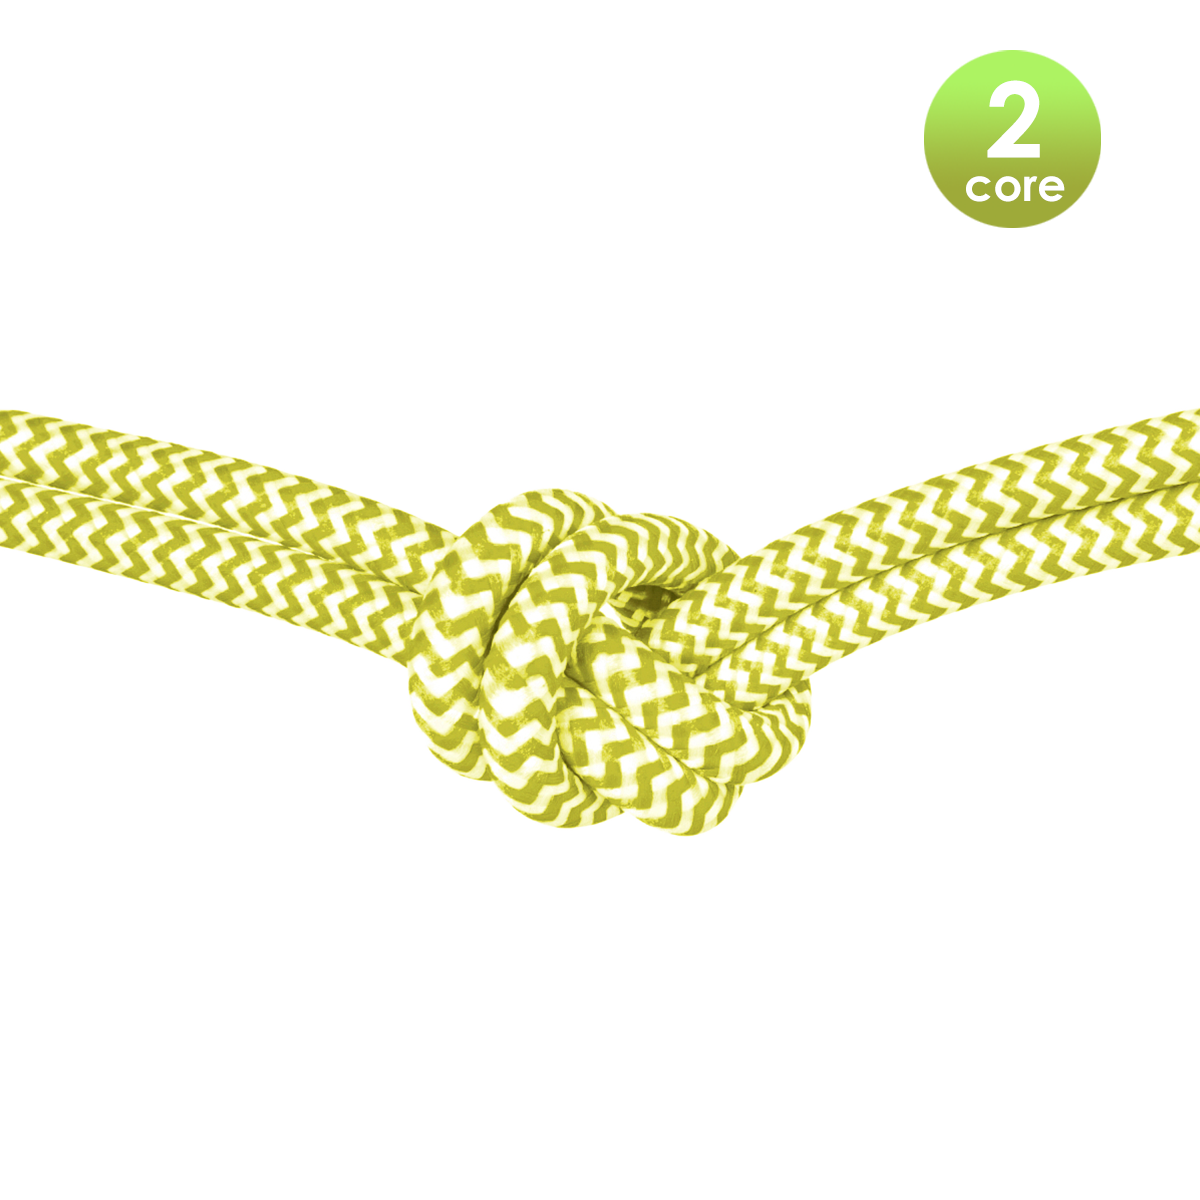 Tangla lighting - TLCB03012A - Fabric cable 2 core - in yellow and white